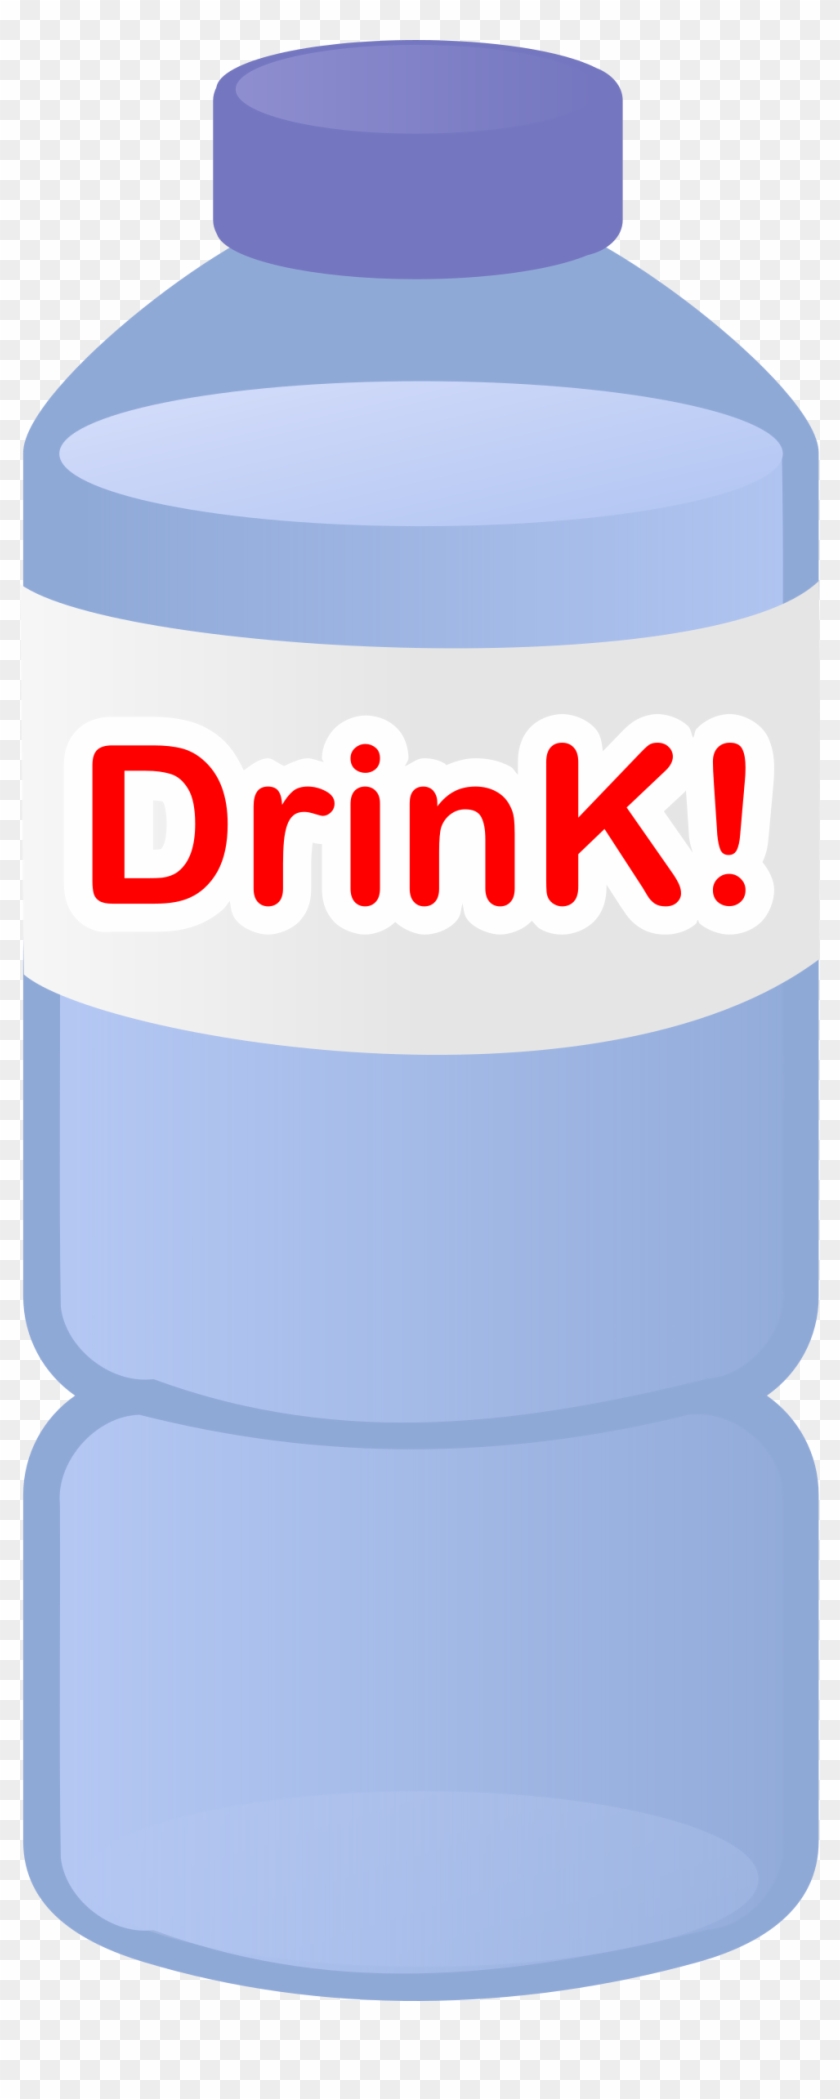 This Free Icons Png Design Of Small Water Bottle - Drink Bottle Clipart #973216